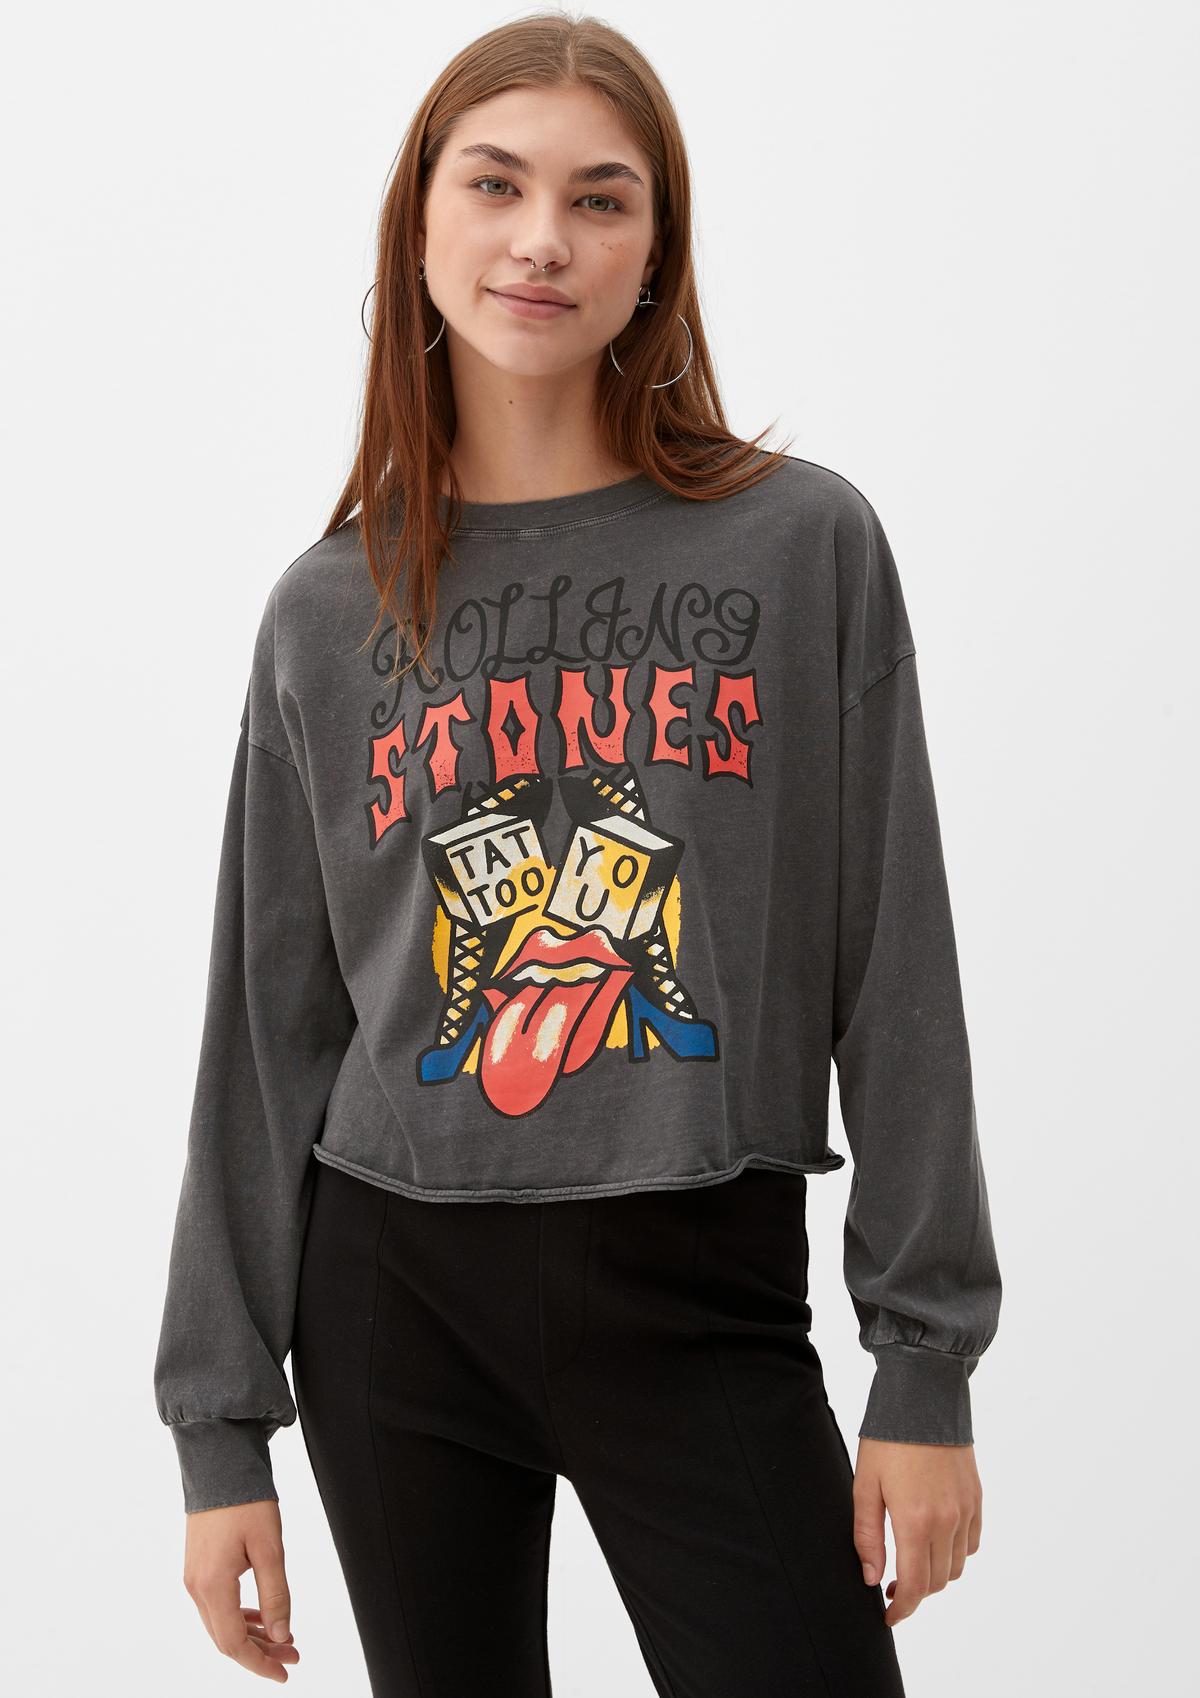 s.Oliver Top with a Rolling Stones print